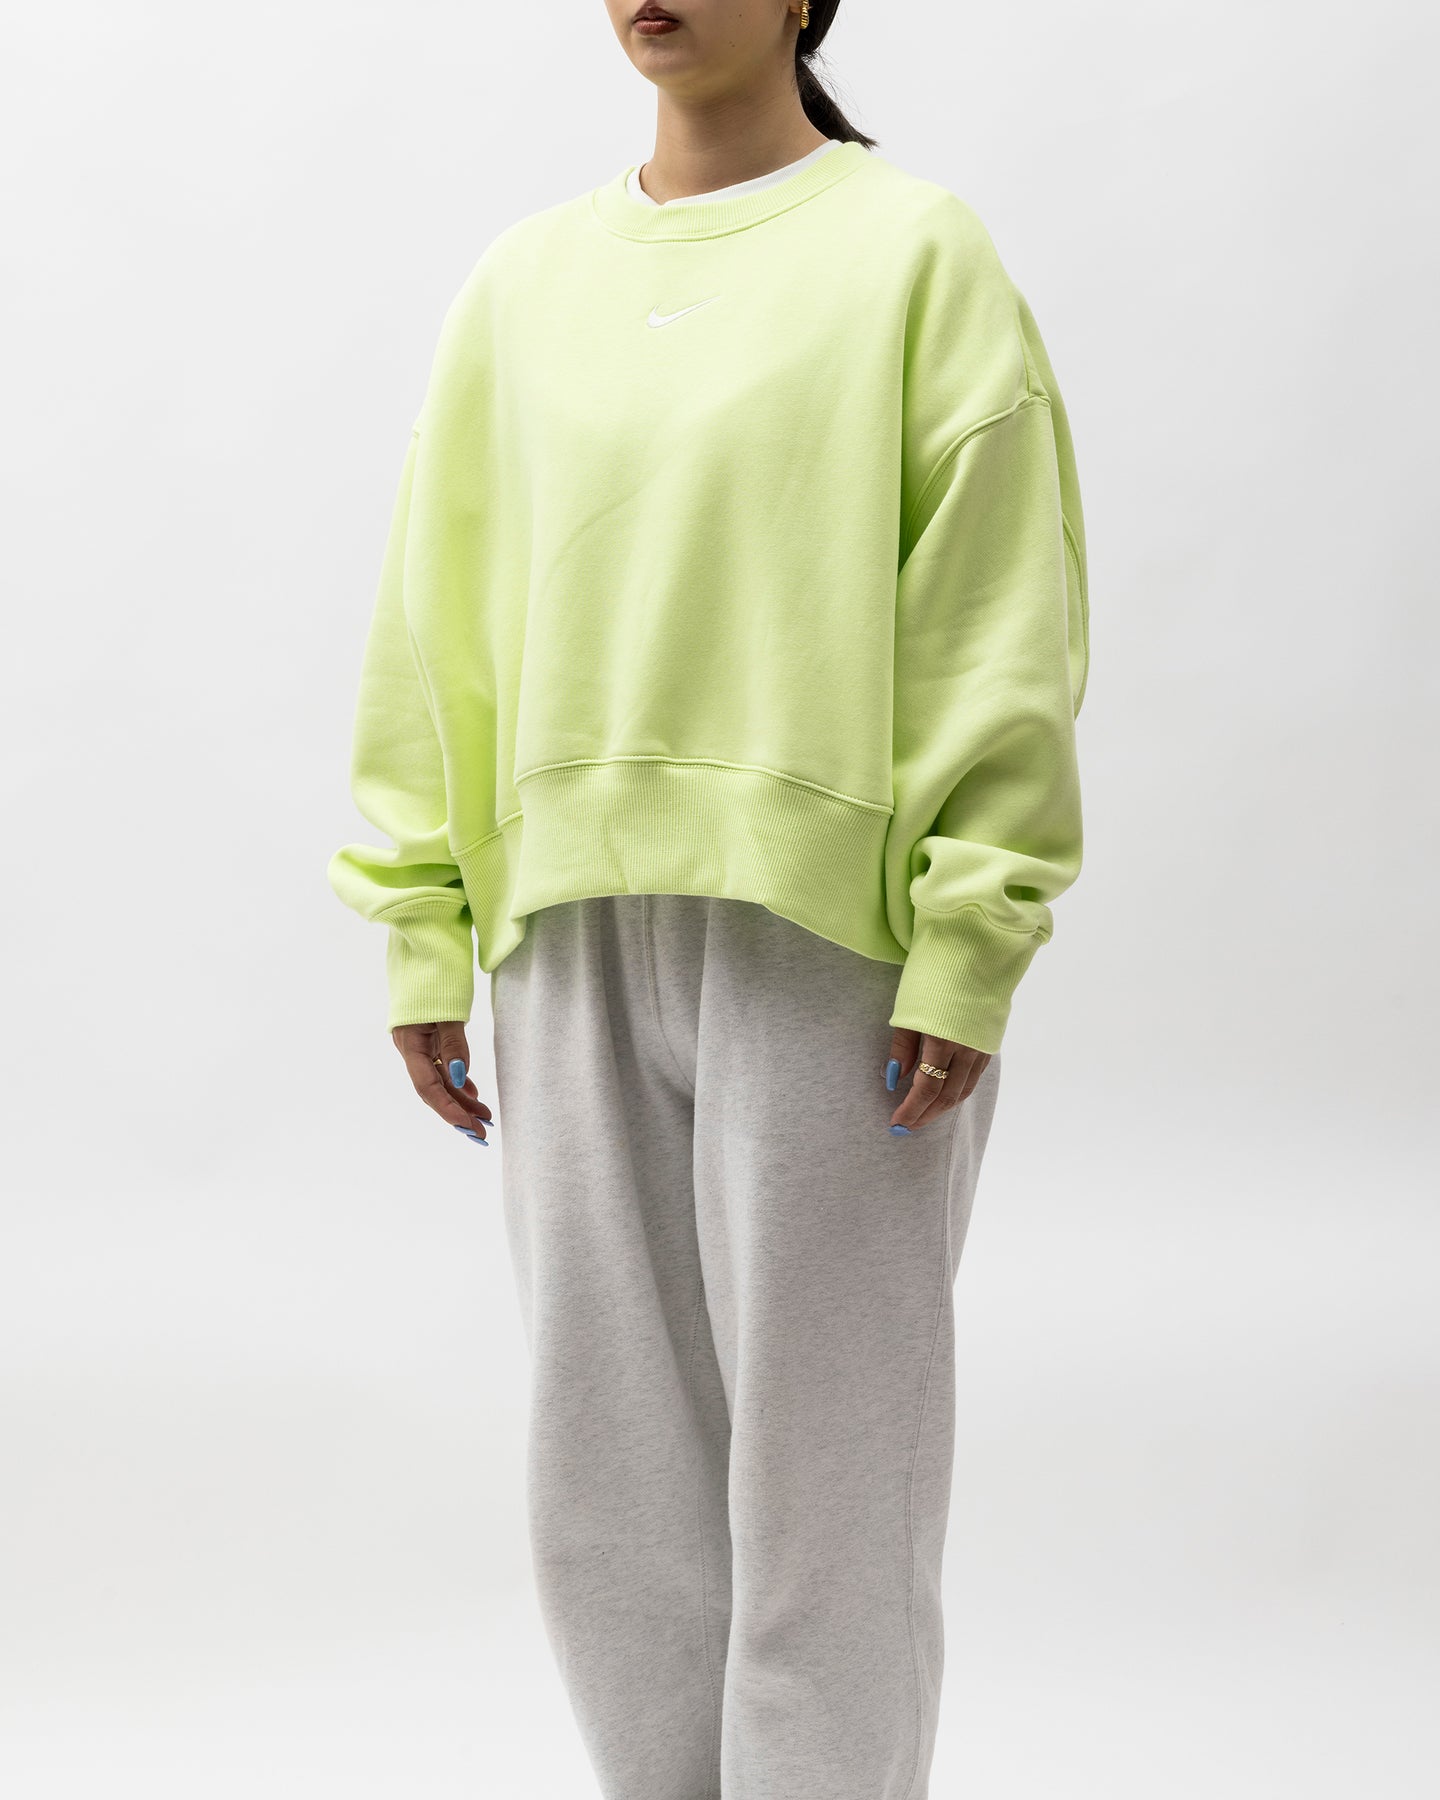 NIKE WMNS NSW STYLE FLEECE L/S CREW OOS – A+S